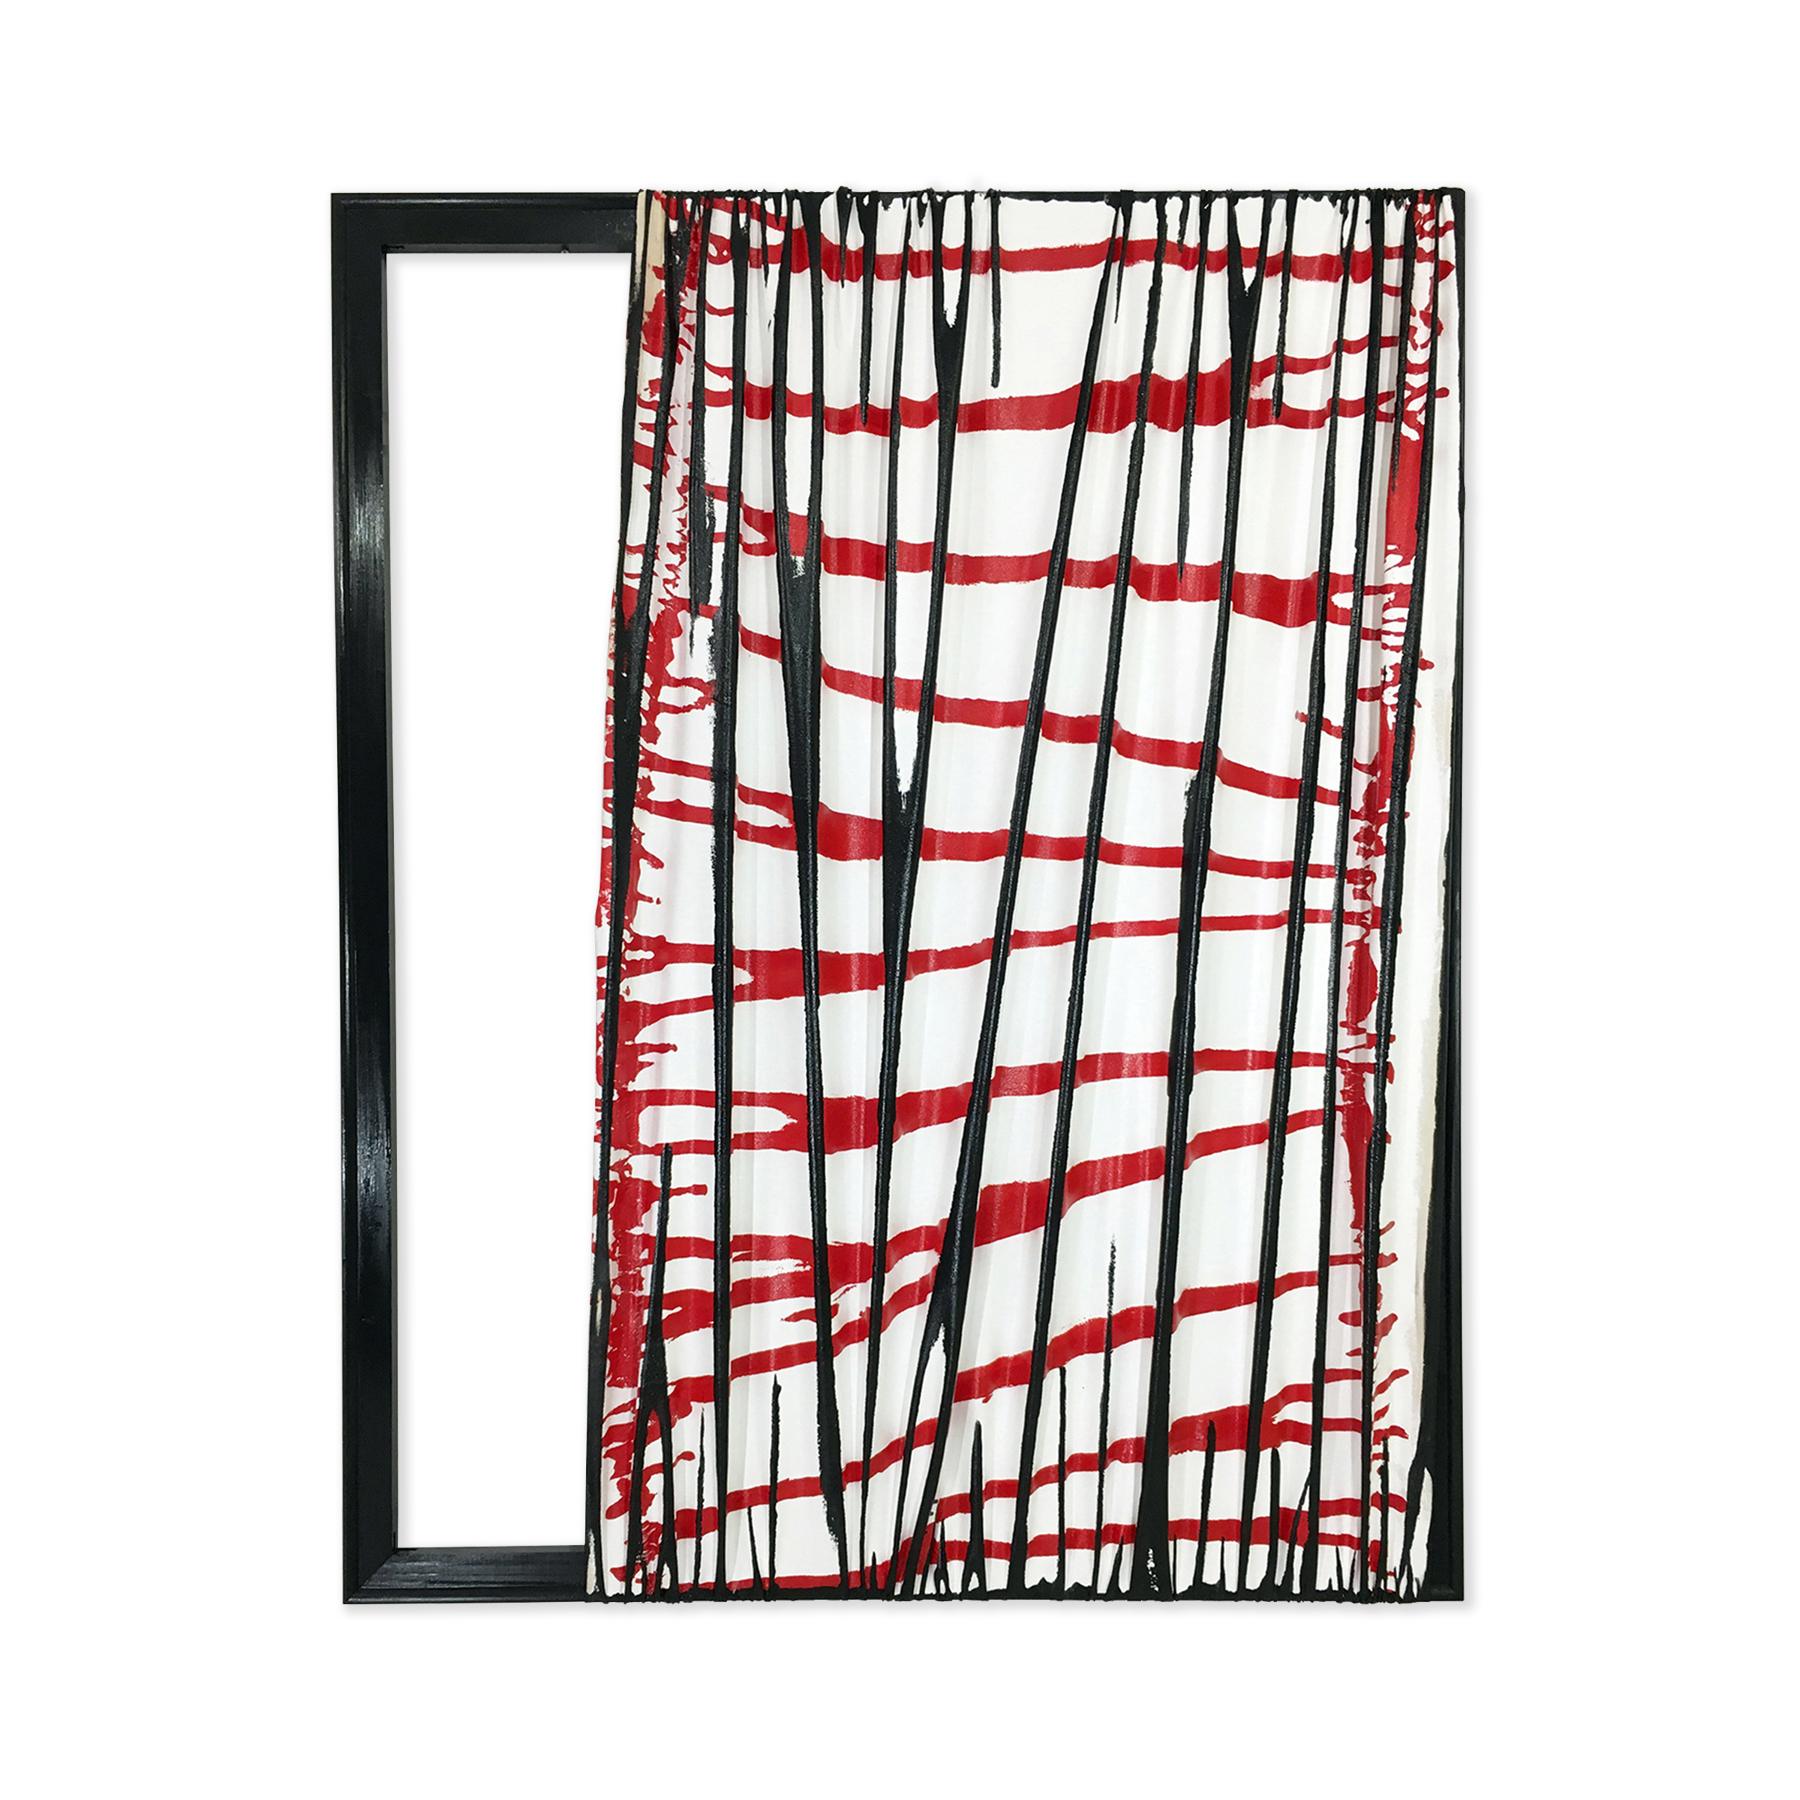 White, red, and black experimental abstract sculptural painting. The work was intentionally removed from the stretchers to make a wave effect on the surface. The piece is signed, titled, and dated by artist Chris Bexar who is a Houston, Texas